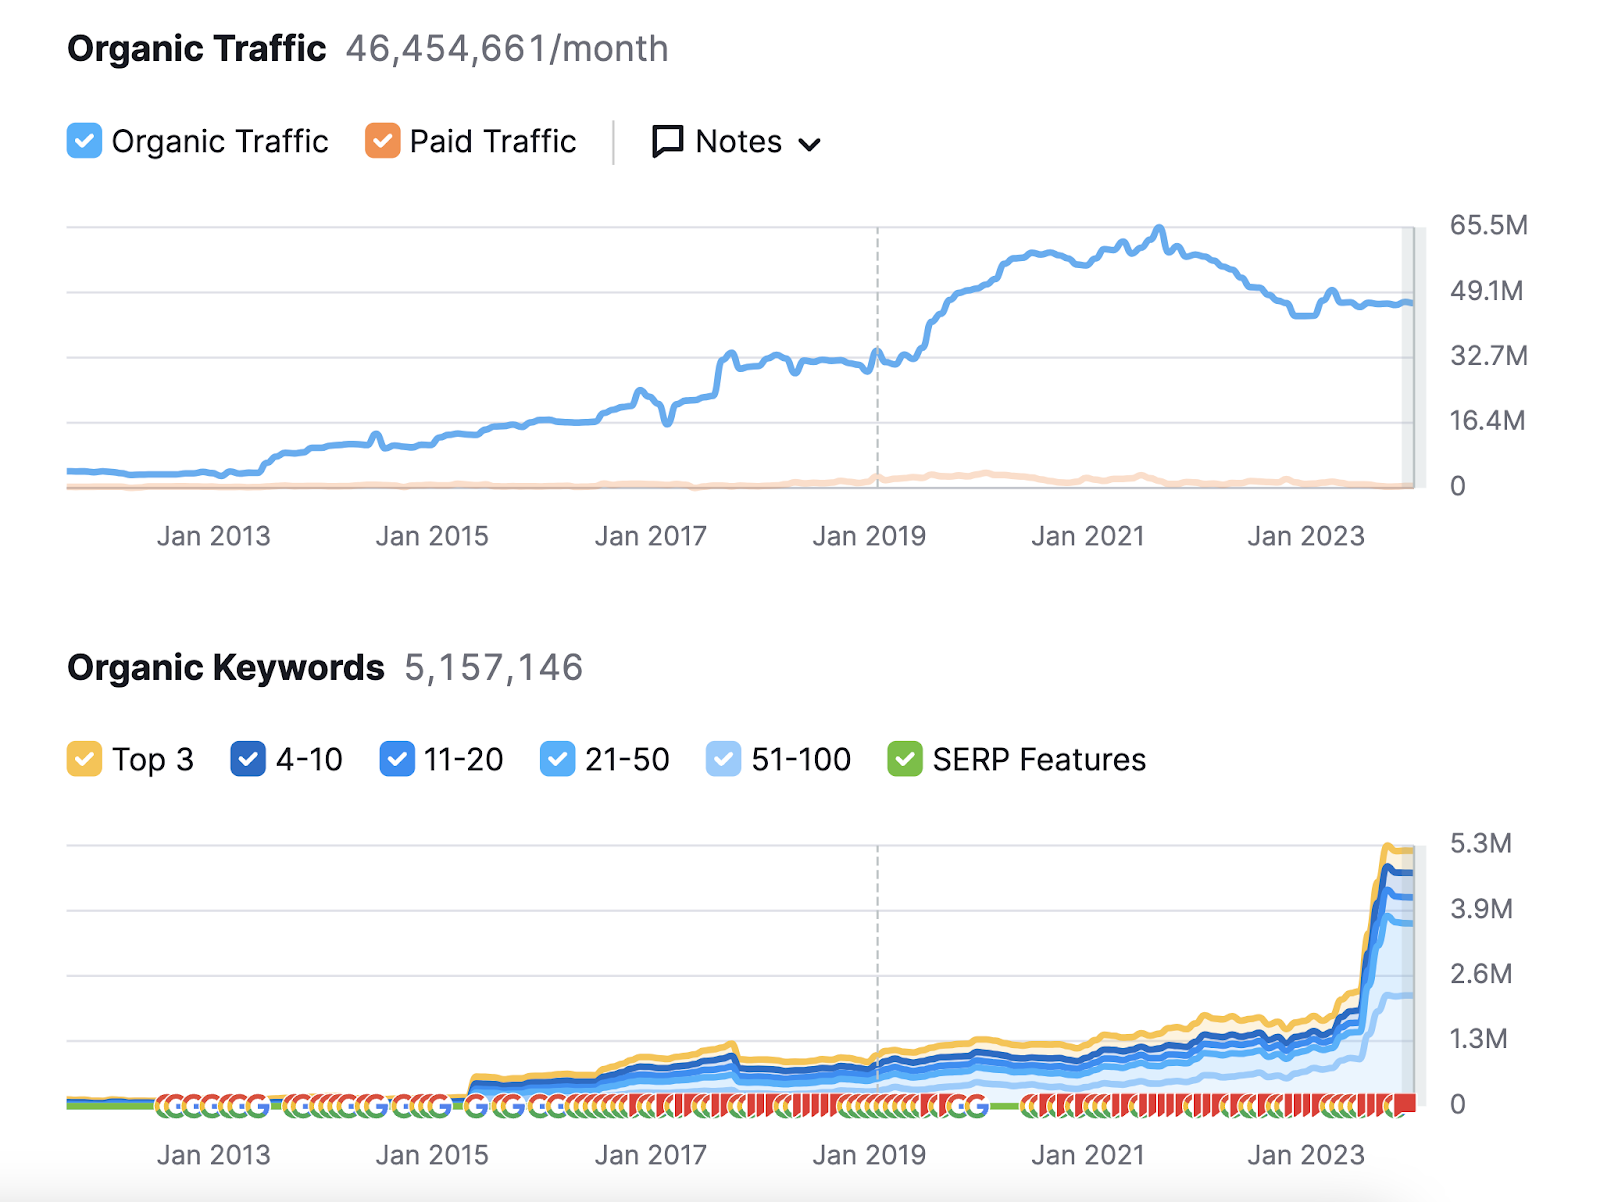 A line chart depicting organic traffic and keywords from 2016 to 2024 in the “Domain Overview” tool